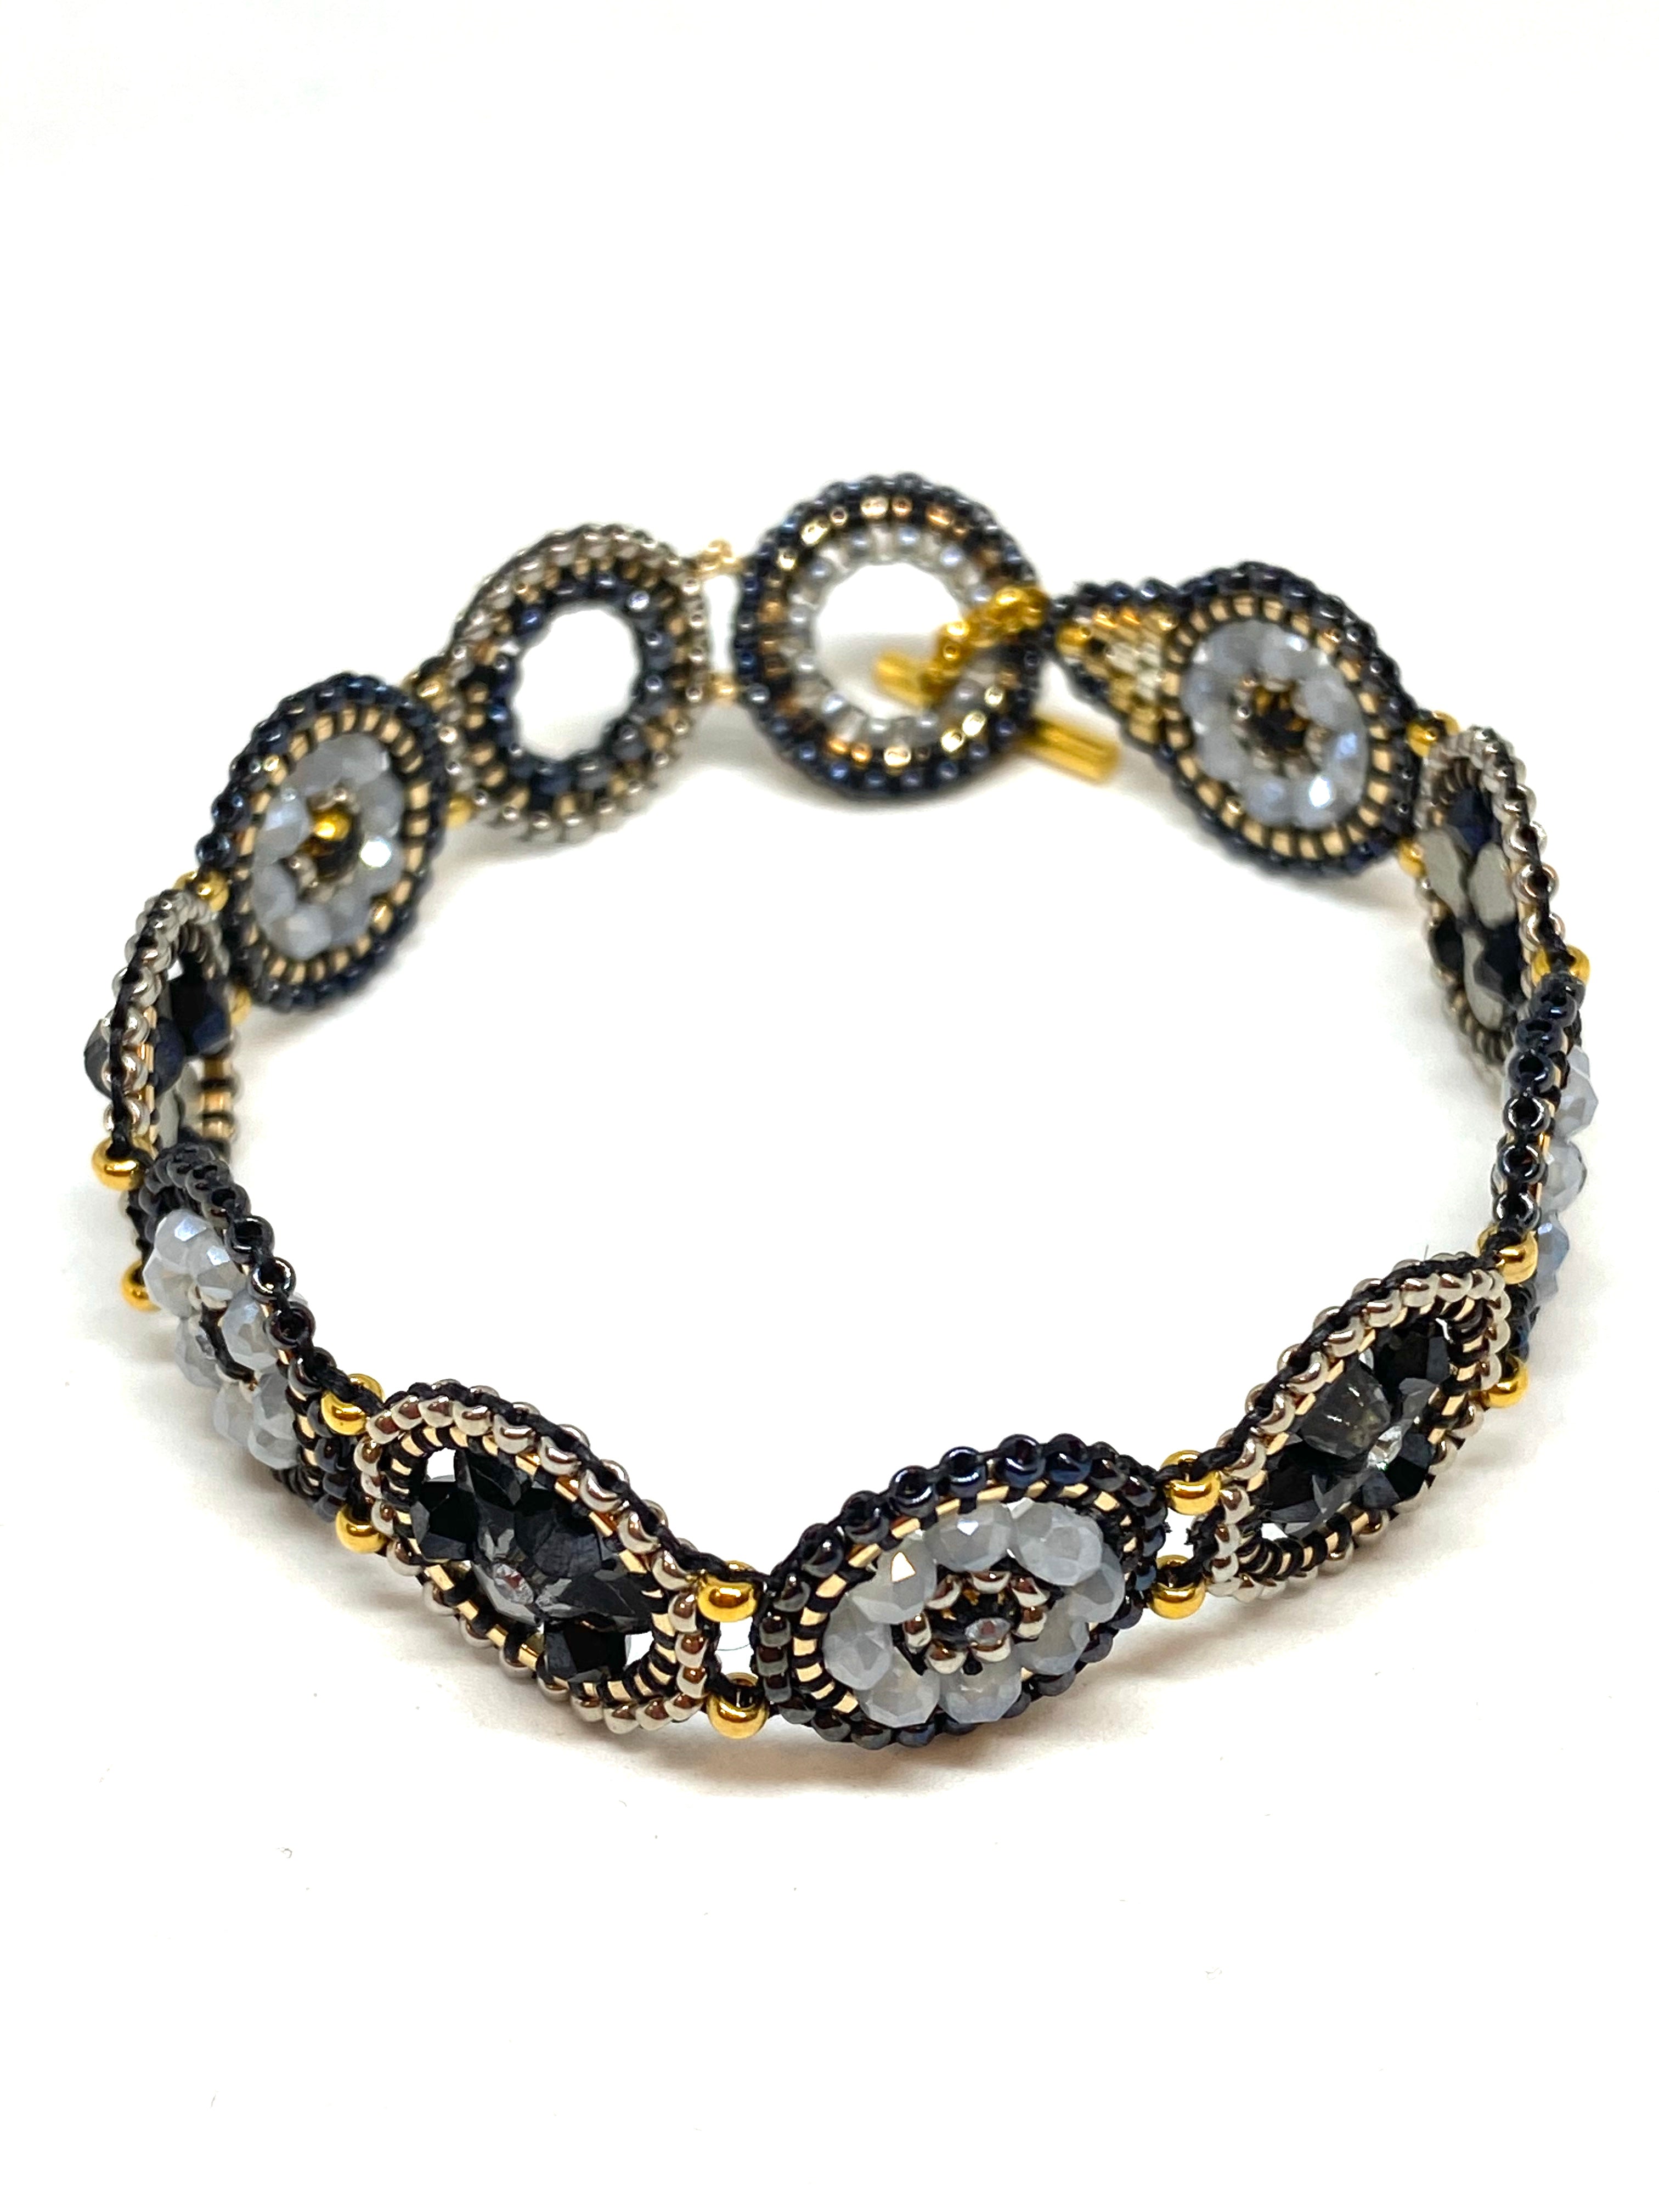 Miguel Ases Swarovski and Hematite and Miyuki Seed Bead Bracelet found at Patricia in Southern Pines, NC 